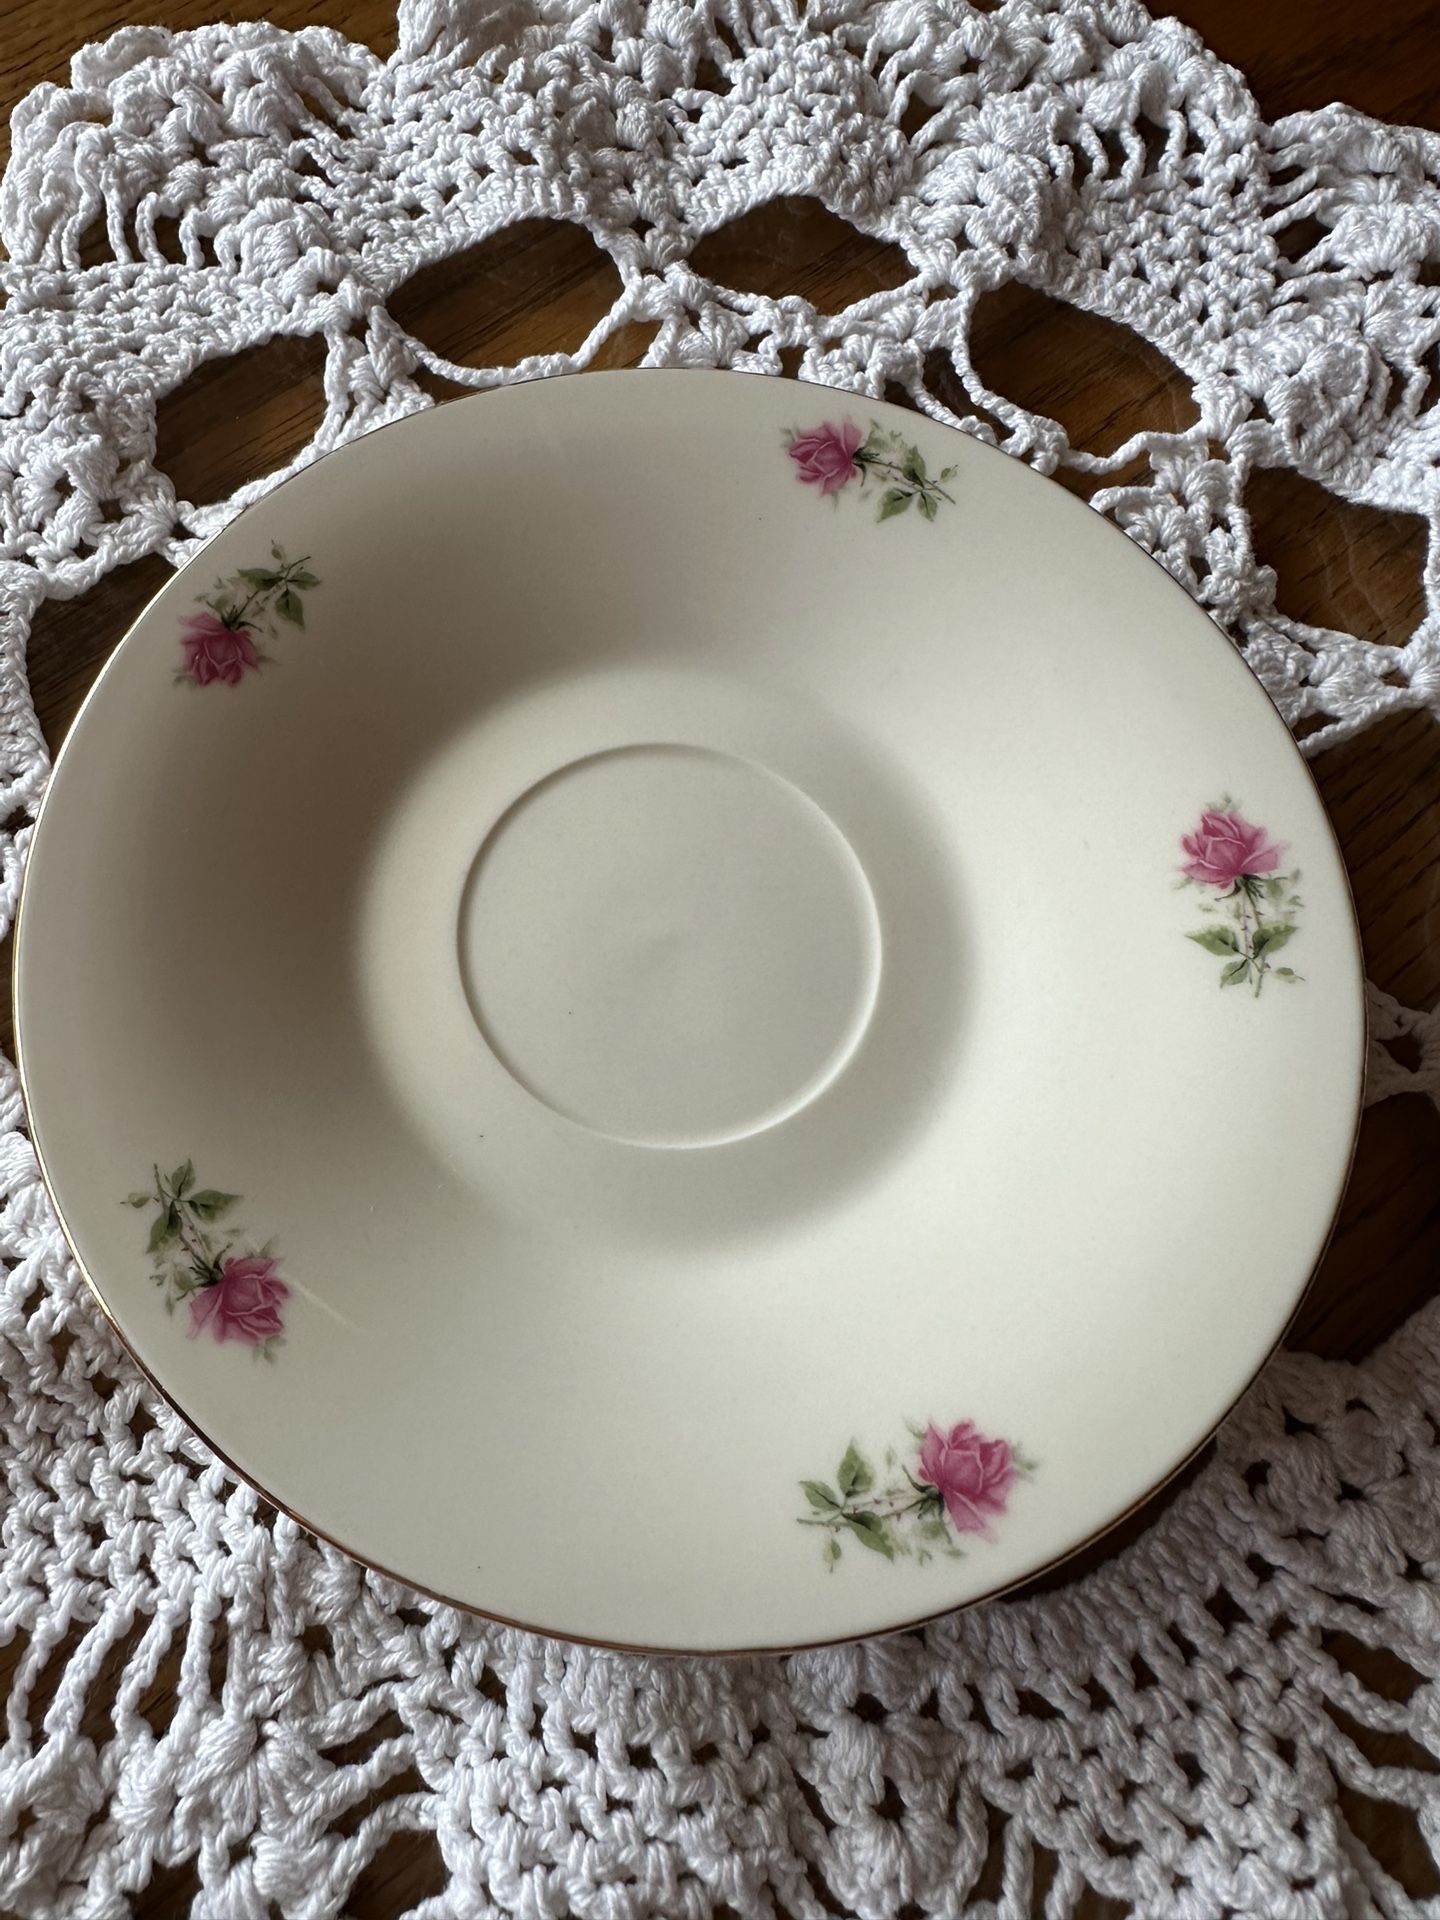 Two Saucers from Formalities by Baum Bros, made In China